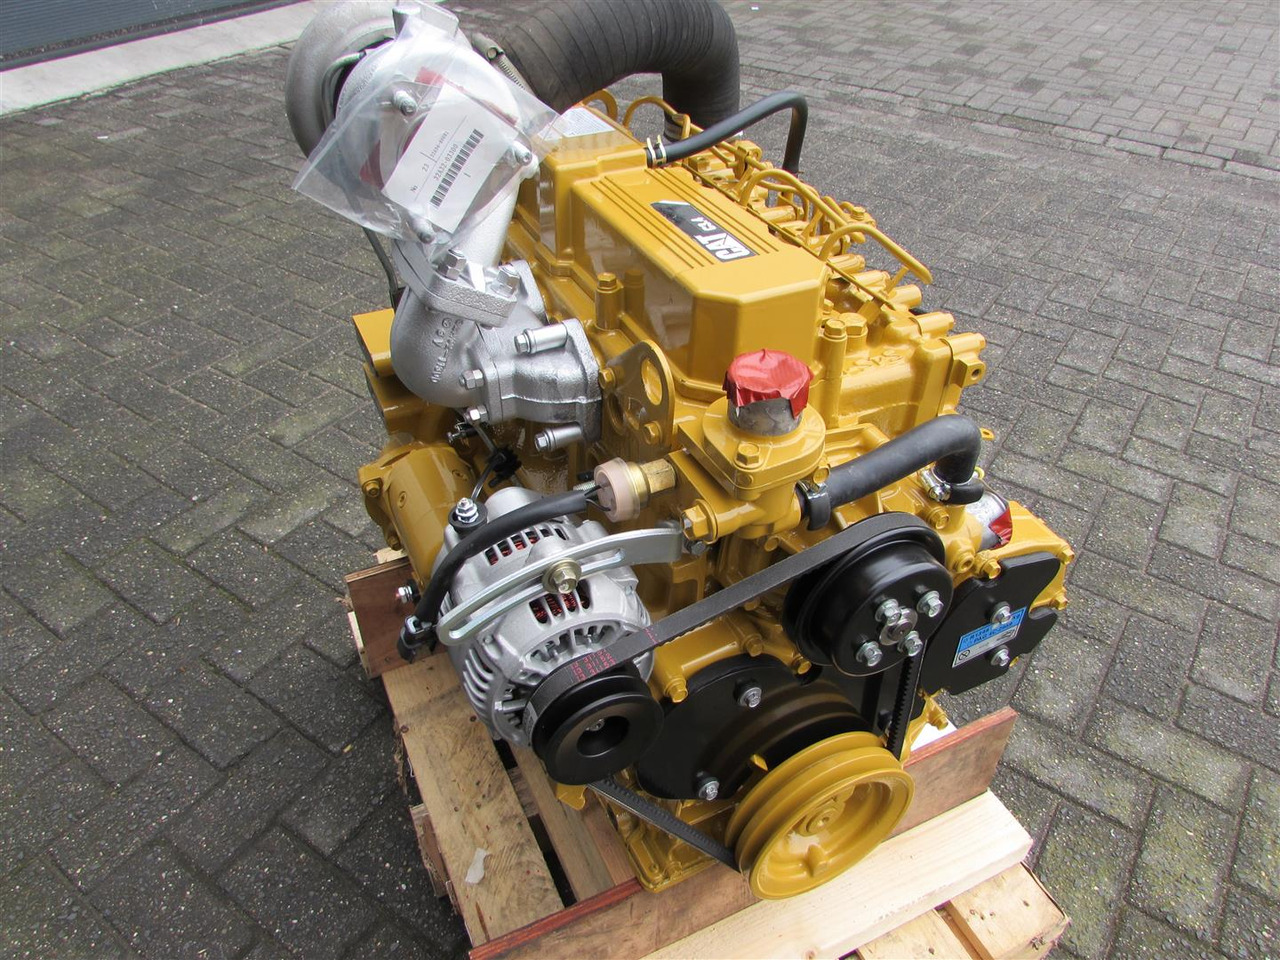 CATERPILLAR / MITSUBISHI RECON S4S-DT73CWL CAT C3.4 55kW-2500Rpm - Engine for Loader: picture 4